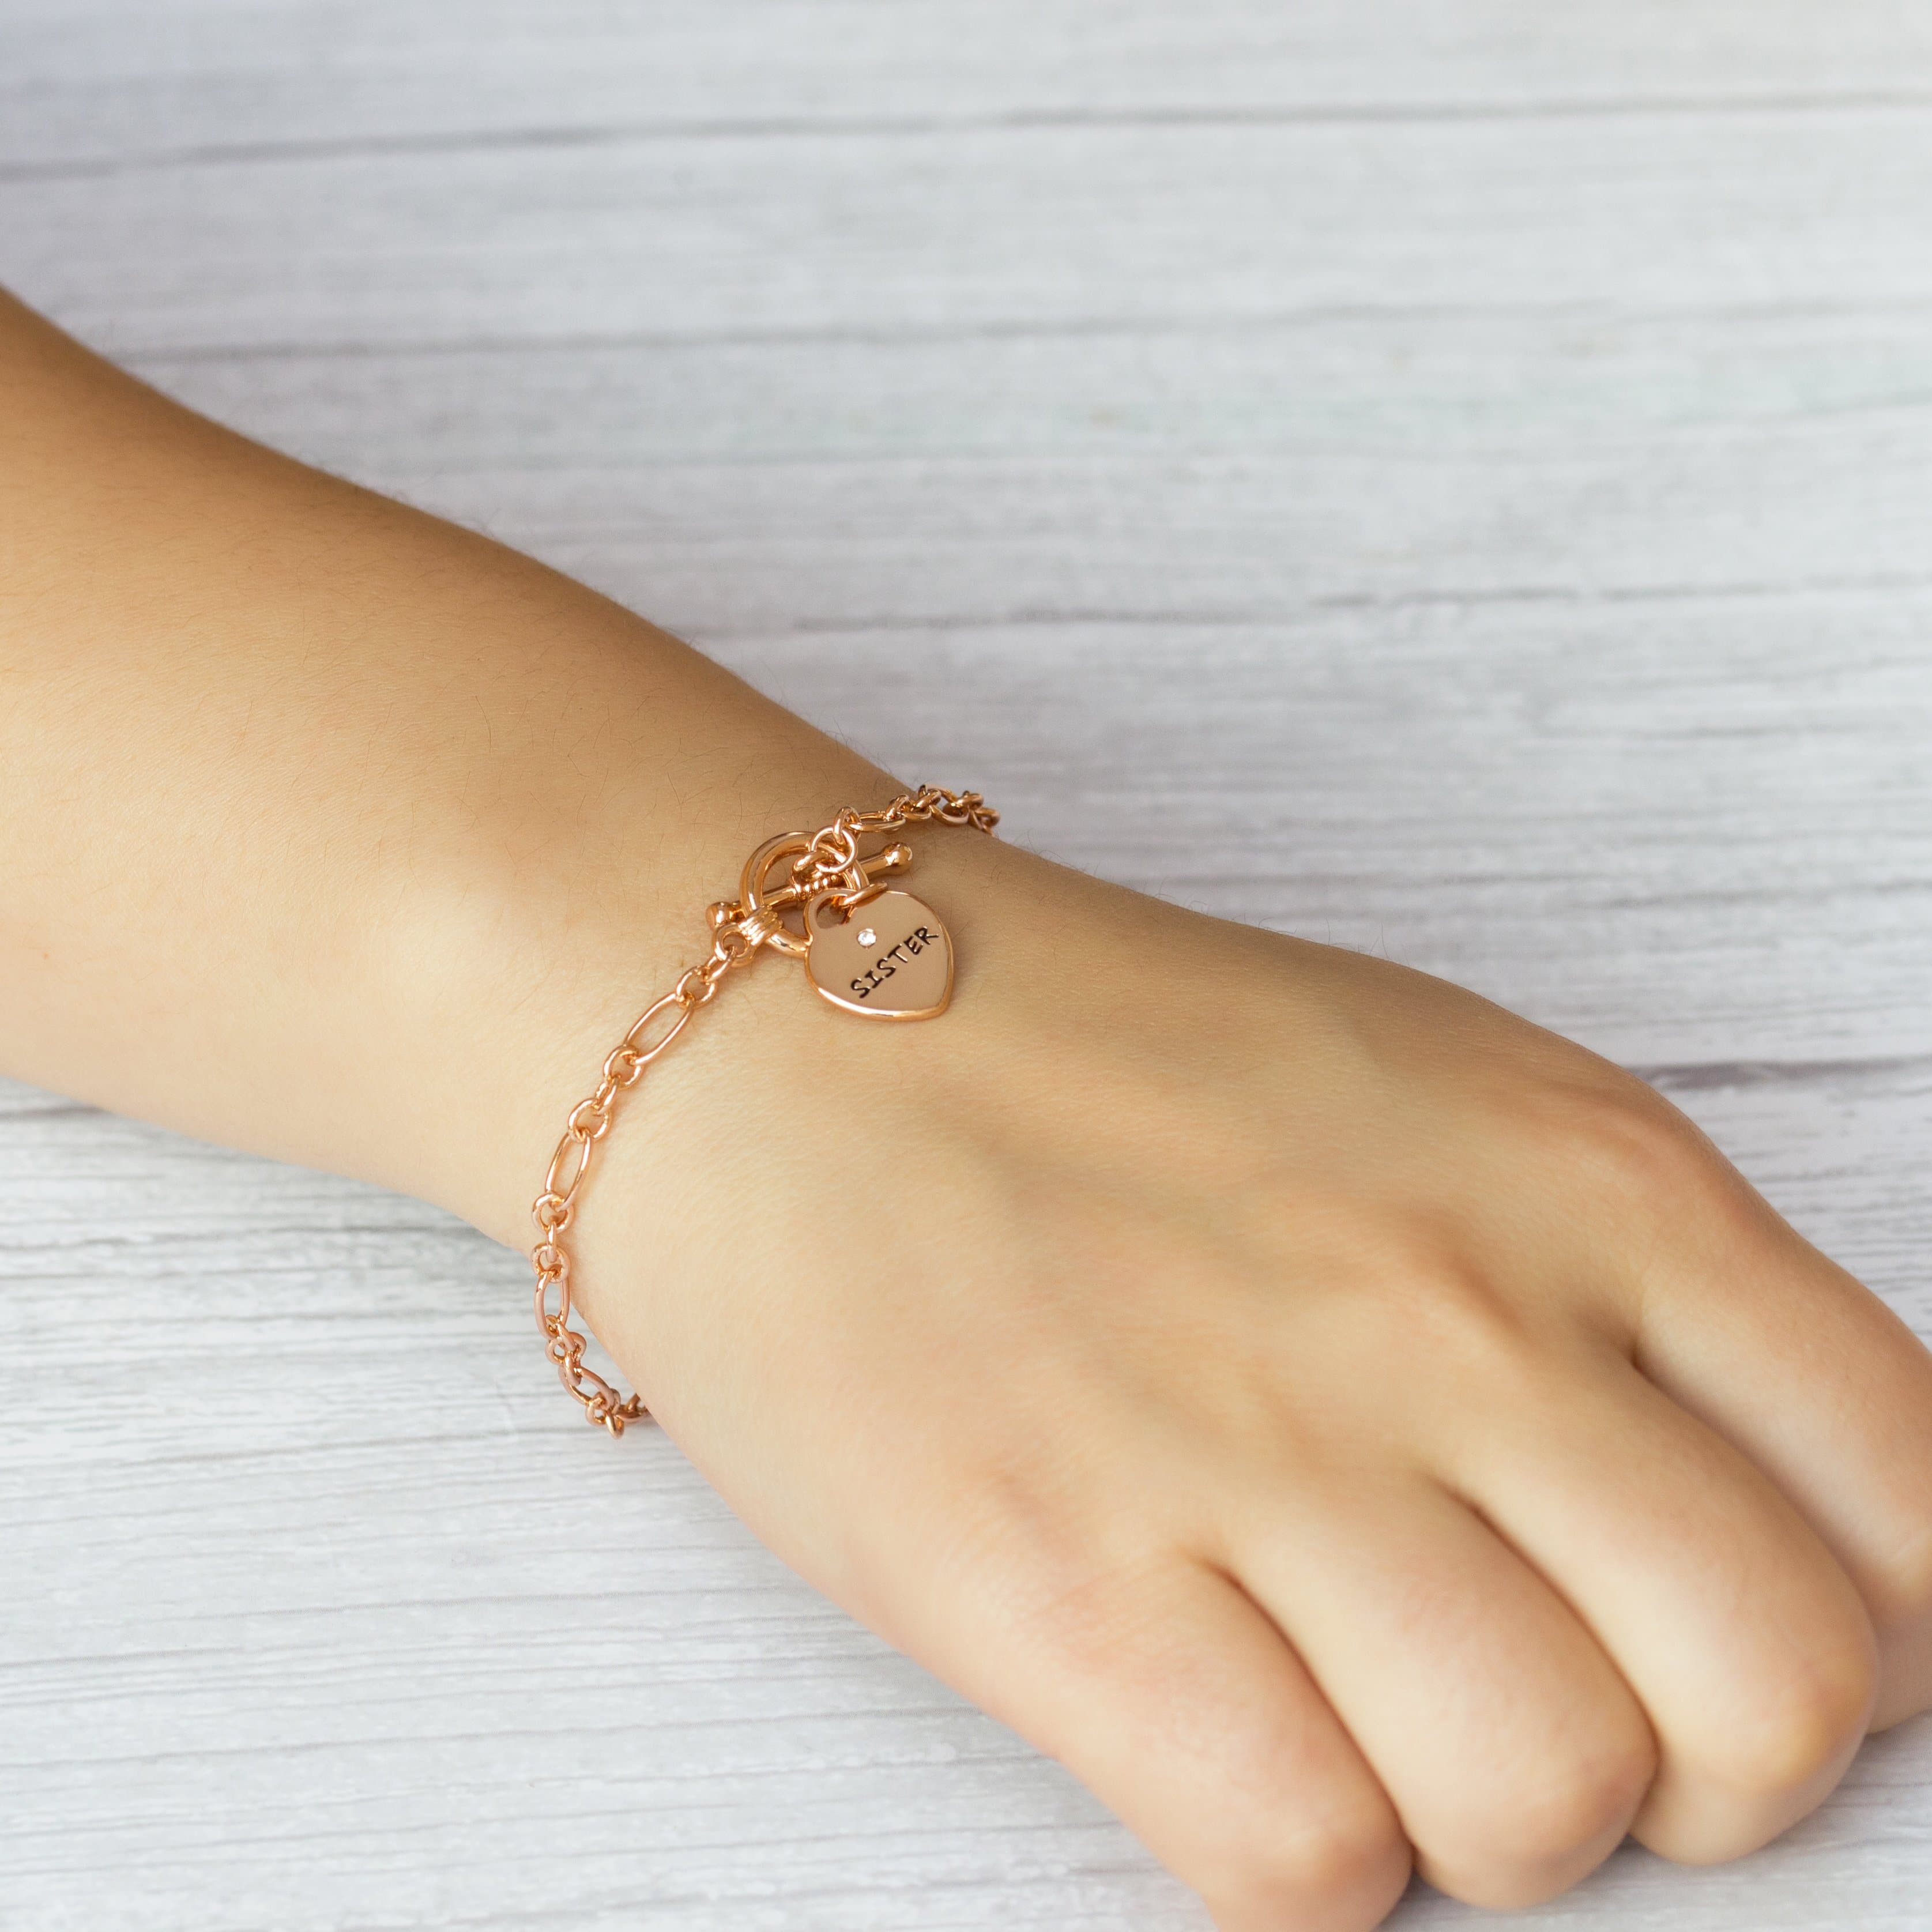 Rose Gold Plated Sister Friendship Quote Charm Bracelet Created with Zircondia® Crystals